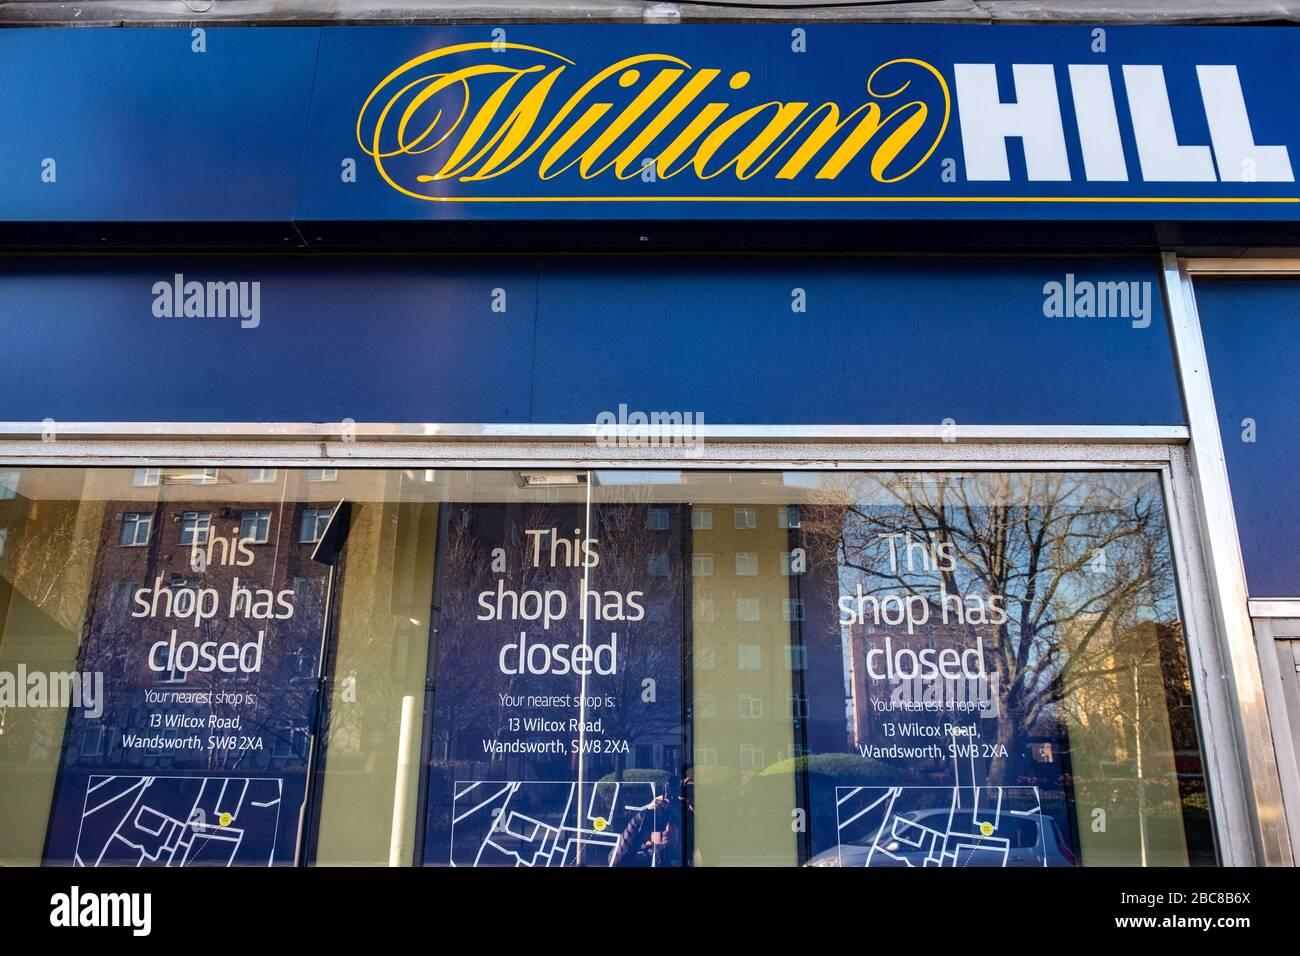 Recently closed down William Hill high street bookmaker / betting shop - exterior logo / signage- London Stock Photo